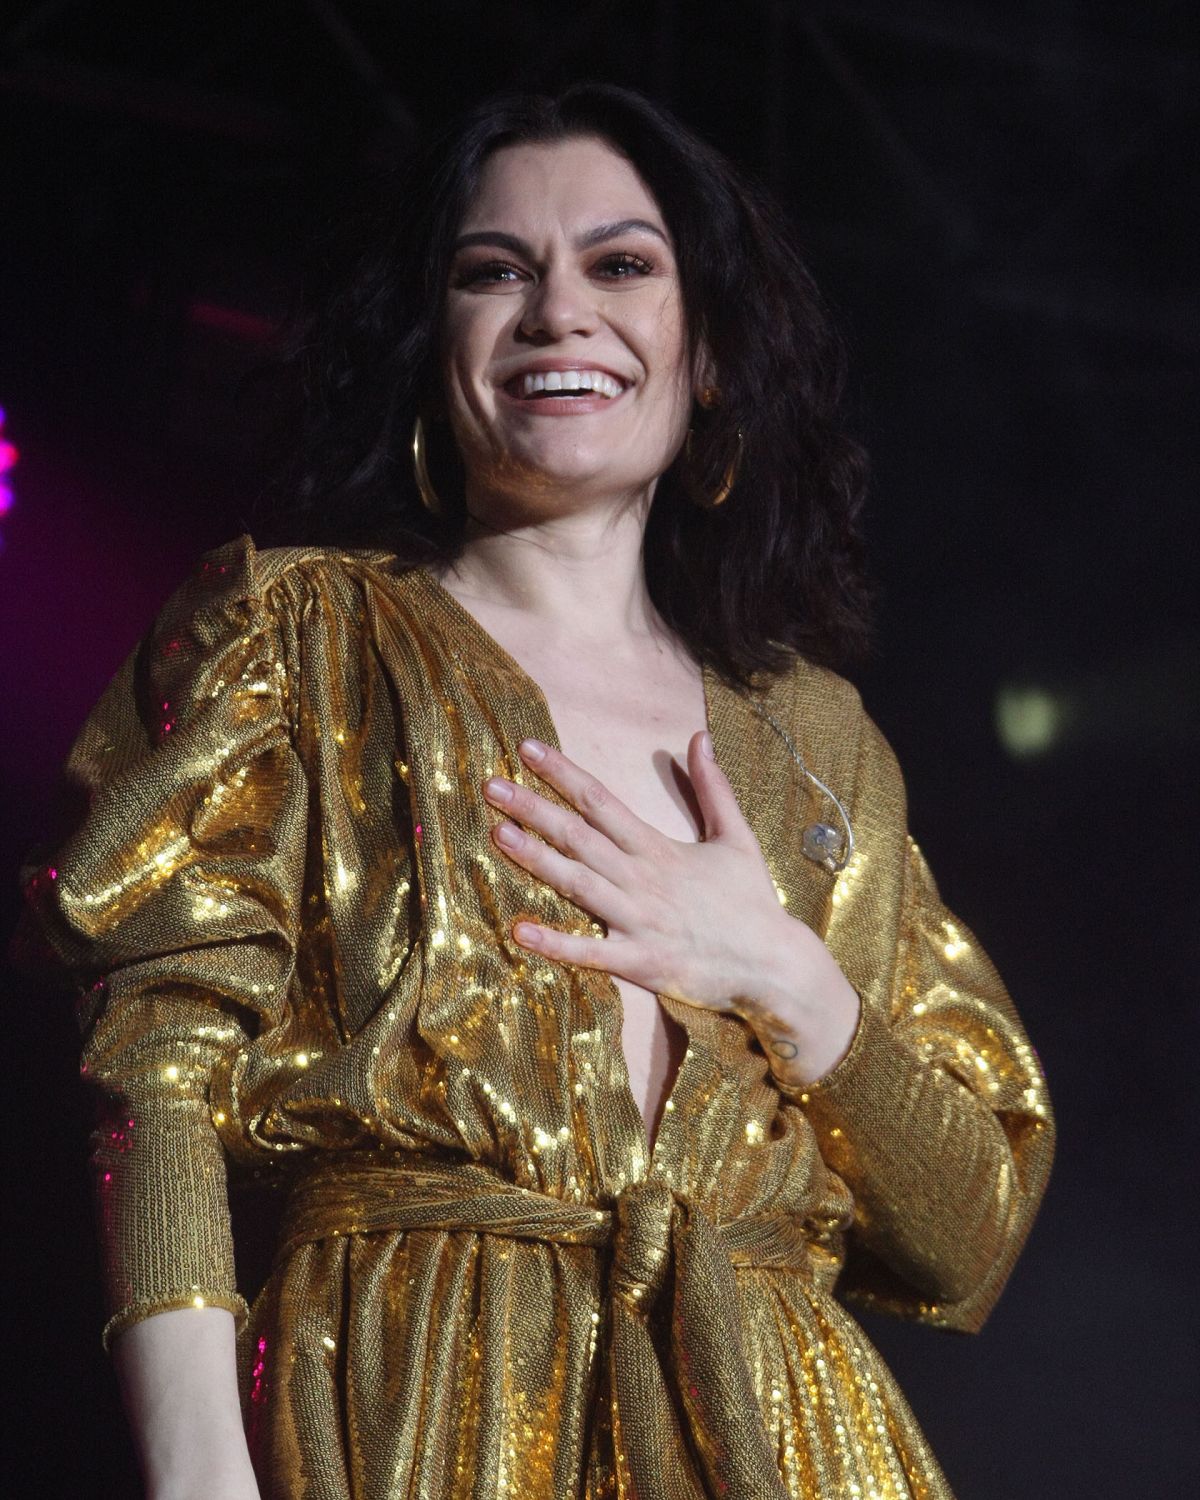 jessie-j-performs-at-national-boxing-stadium-in-dublin-12-01-2018-2.jpg